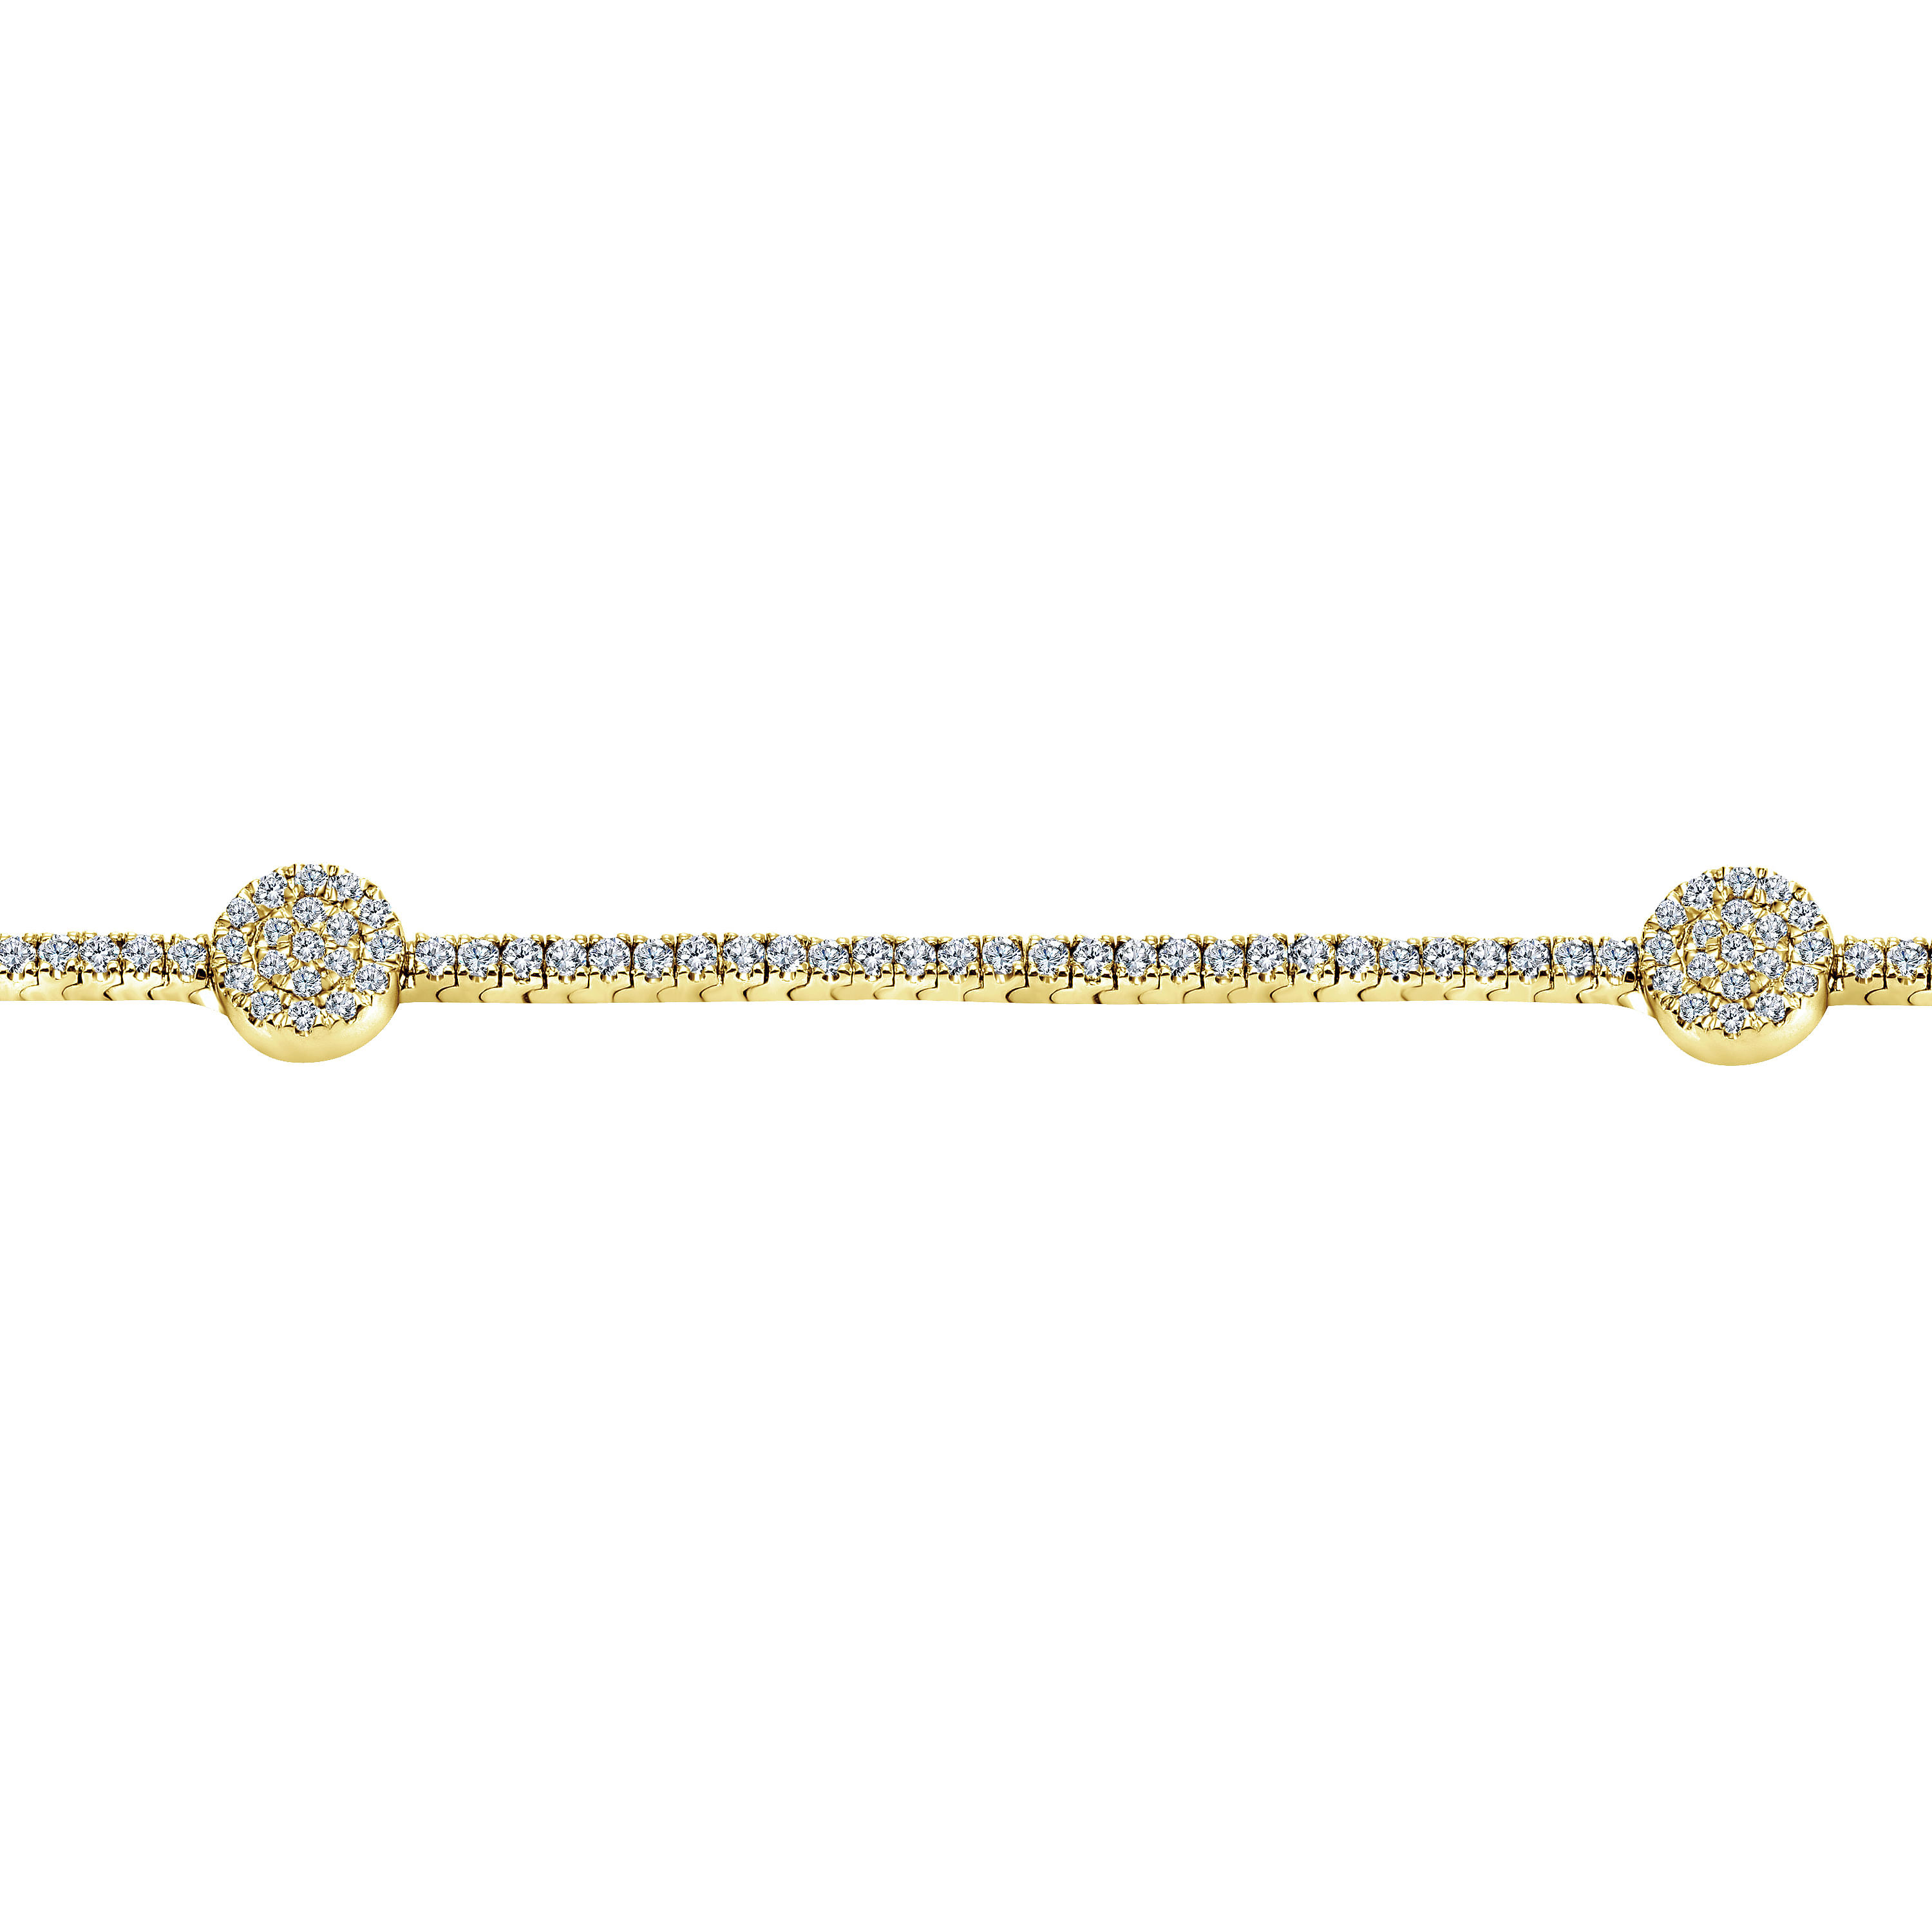 14K Yellow Gold Diamond Tennis Bracelet with Round Cluster Stations